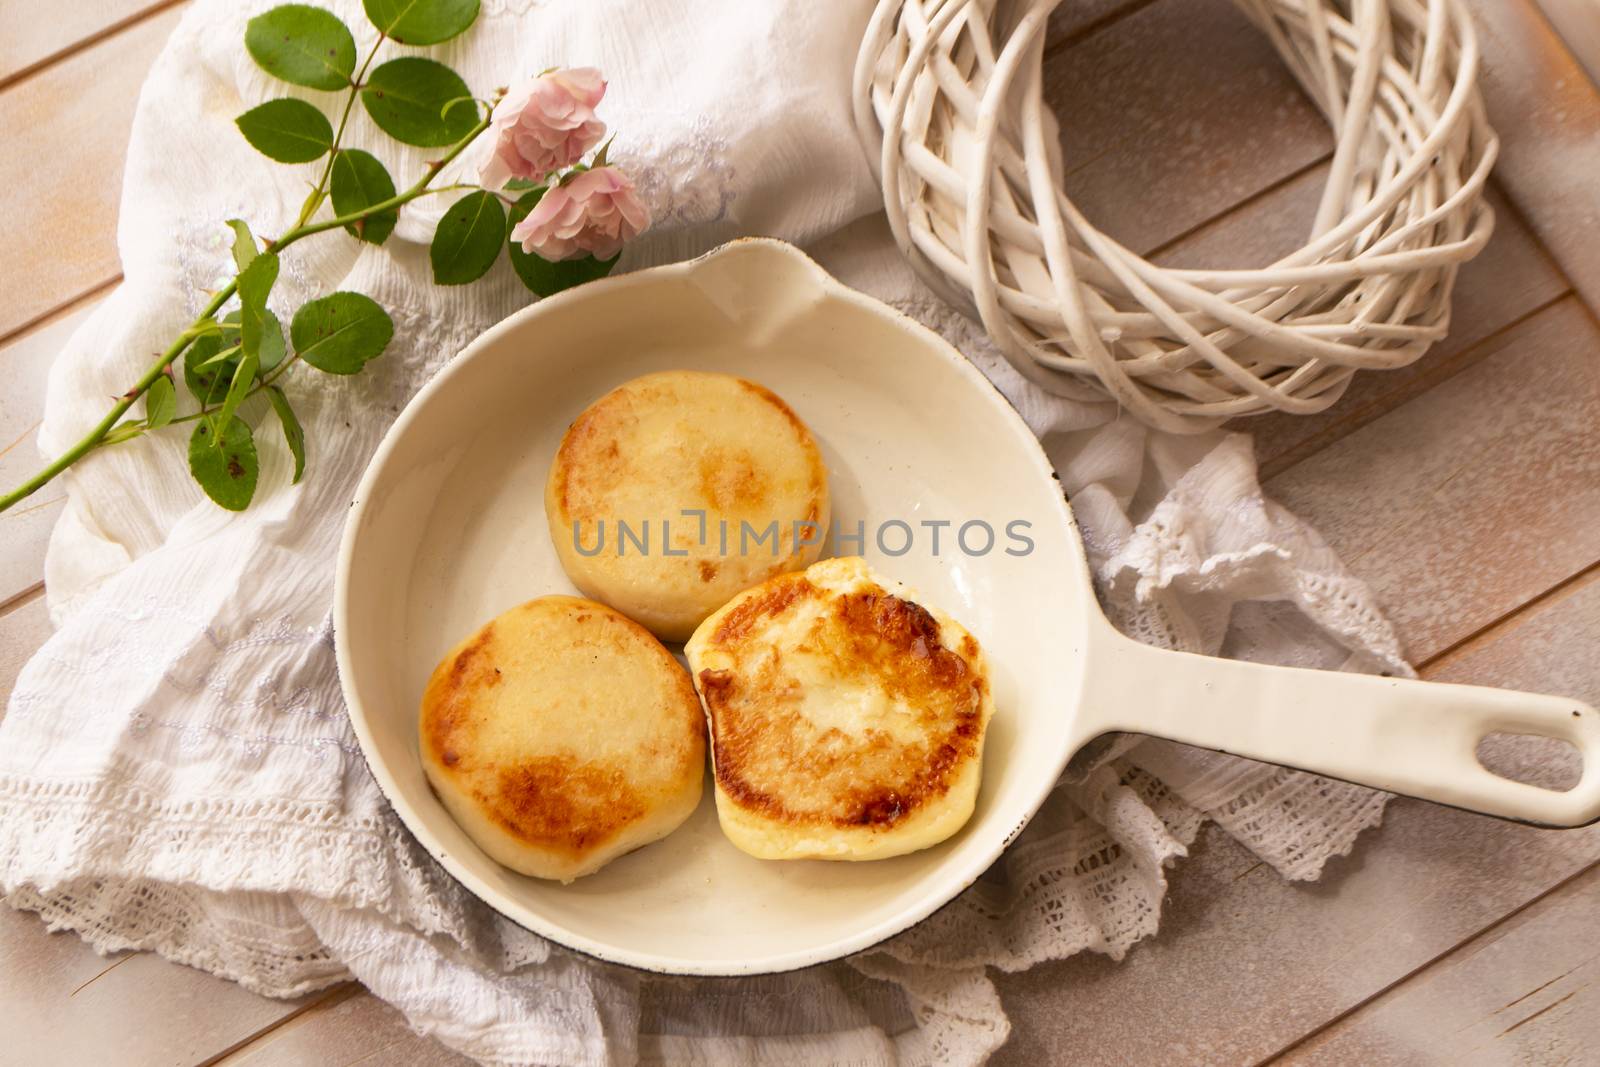 Cast-iron frying pan with curd pancakes or syrniki, shabby table, flat lay